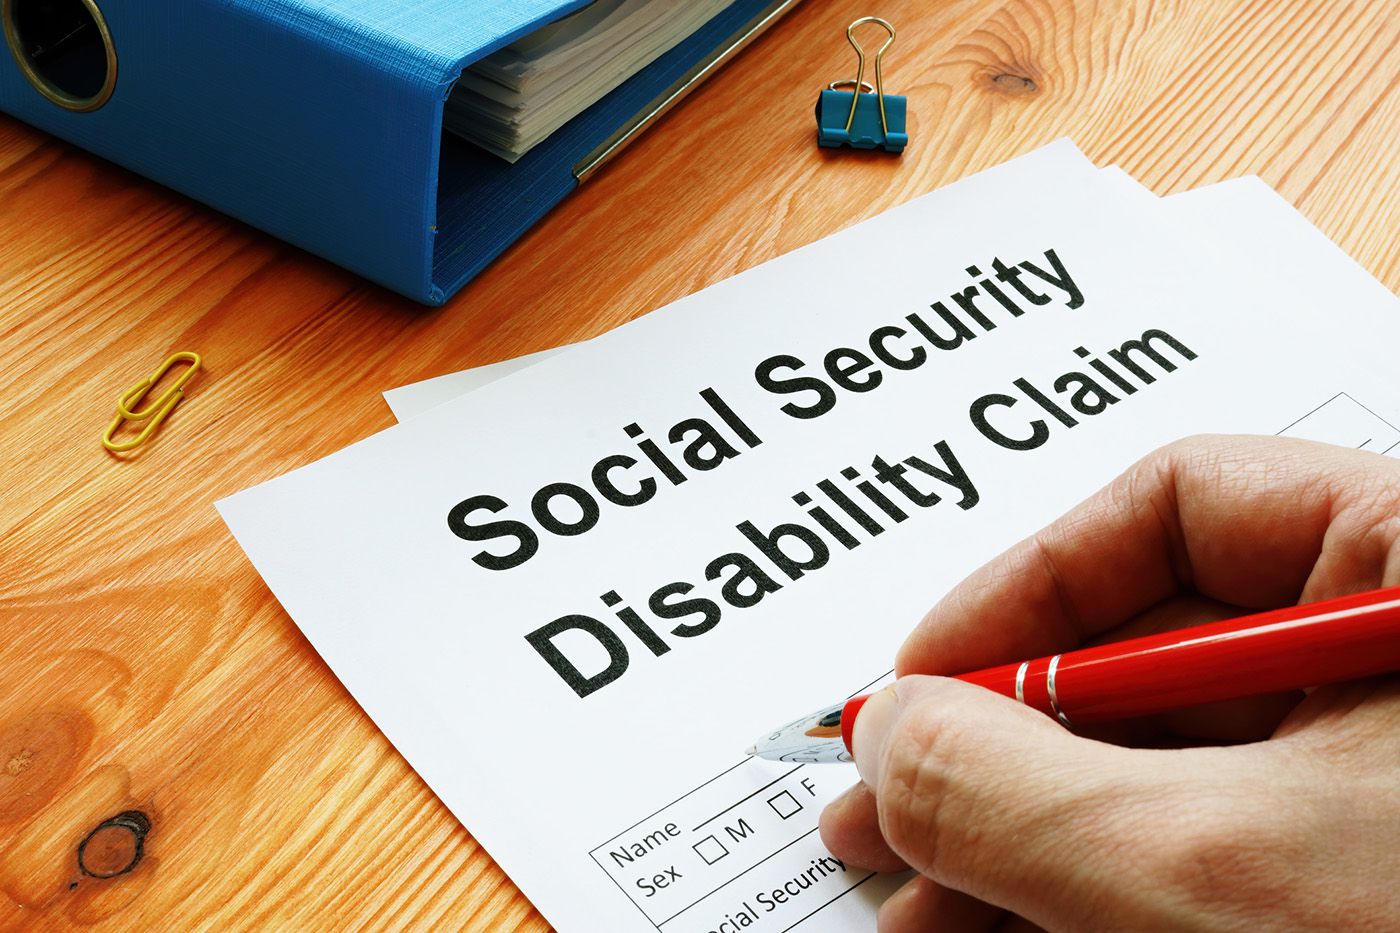 Disability benefits: Theyâre not welfare, but difficult to get